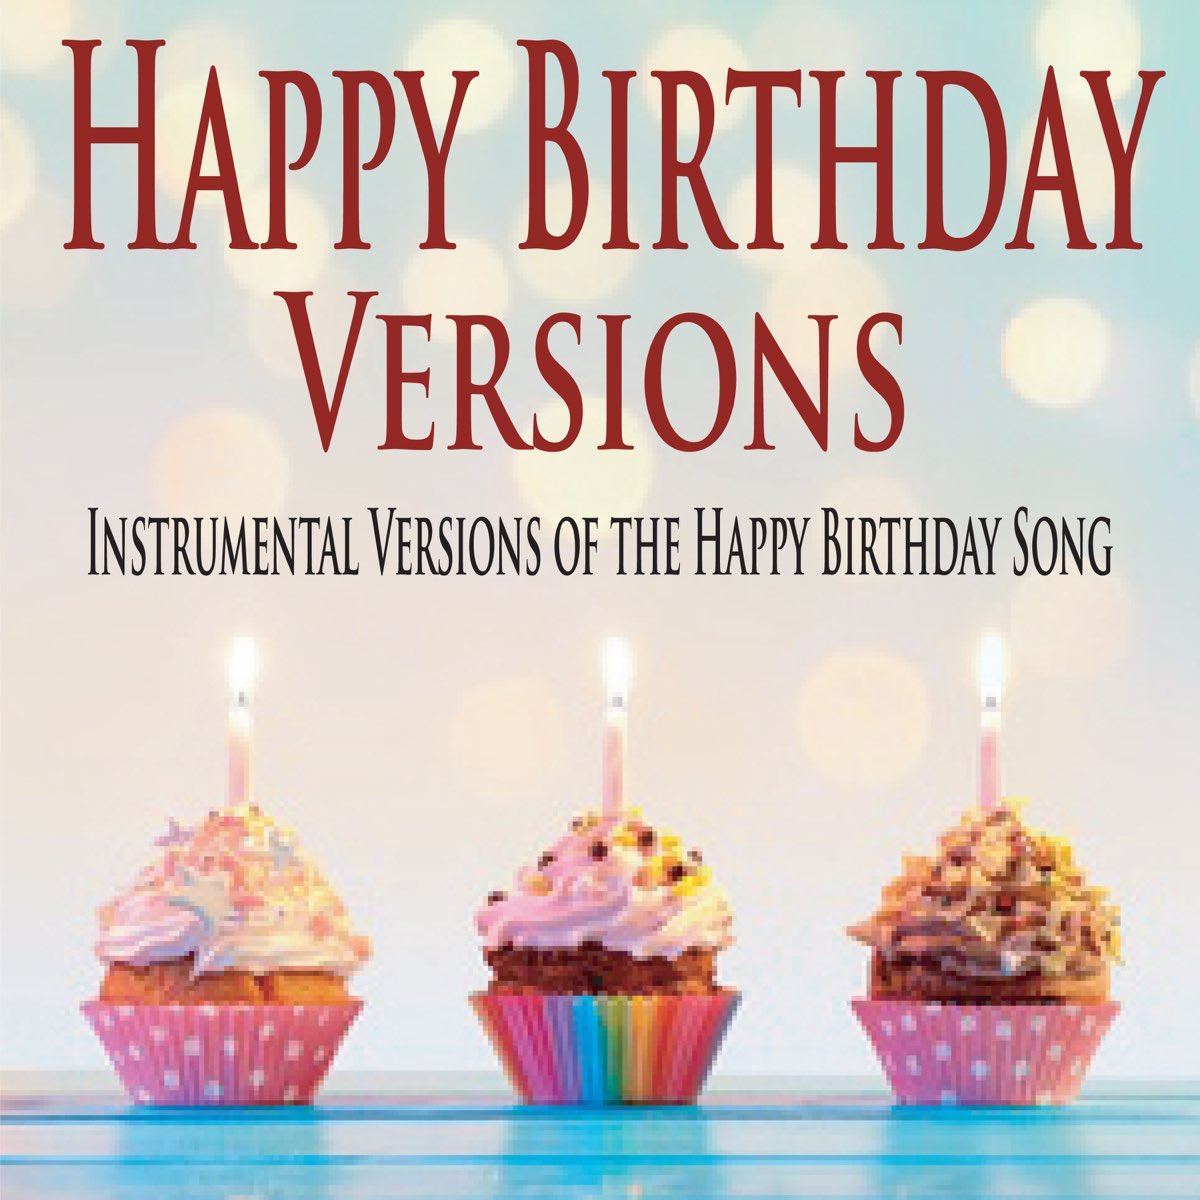 Happy Birthday Versions (Instrumental Versions of the Happy Birthday Song)  by The Suntrees Sky on Apple Music